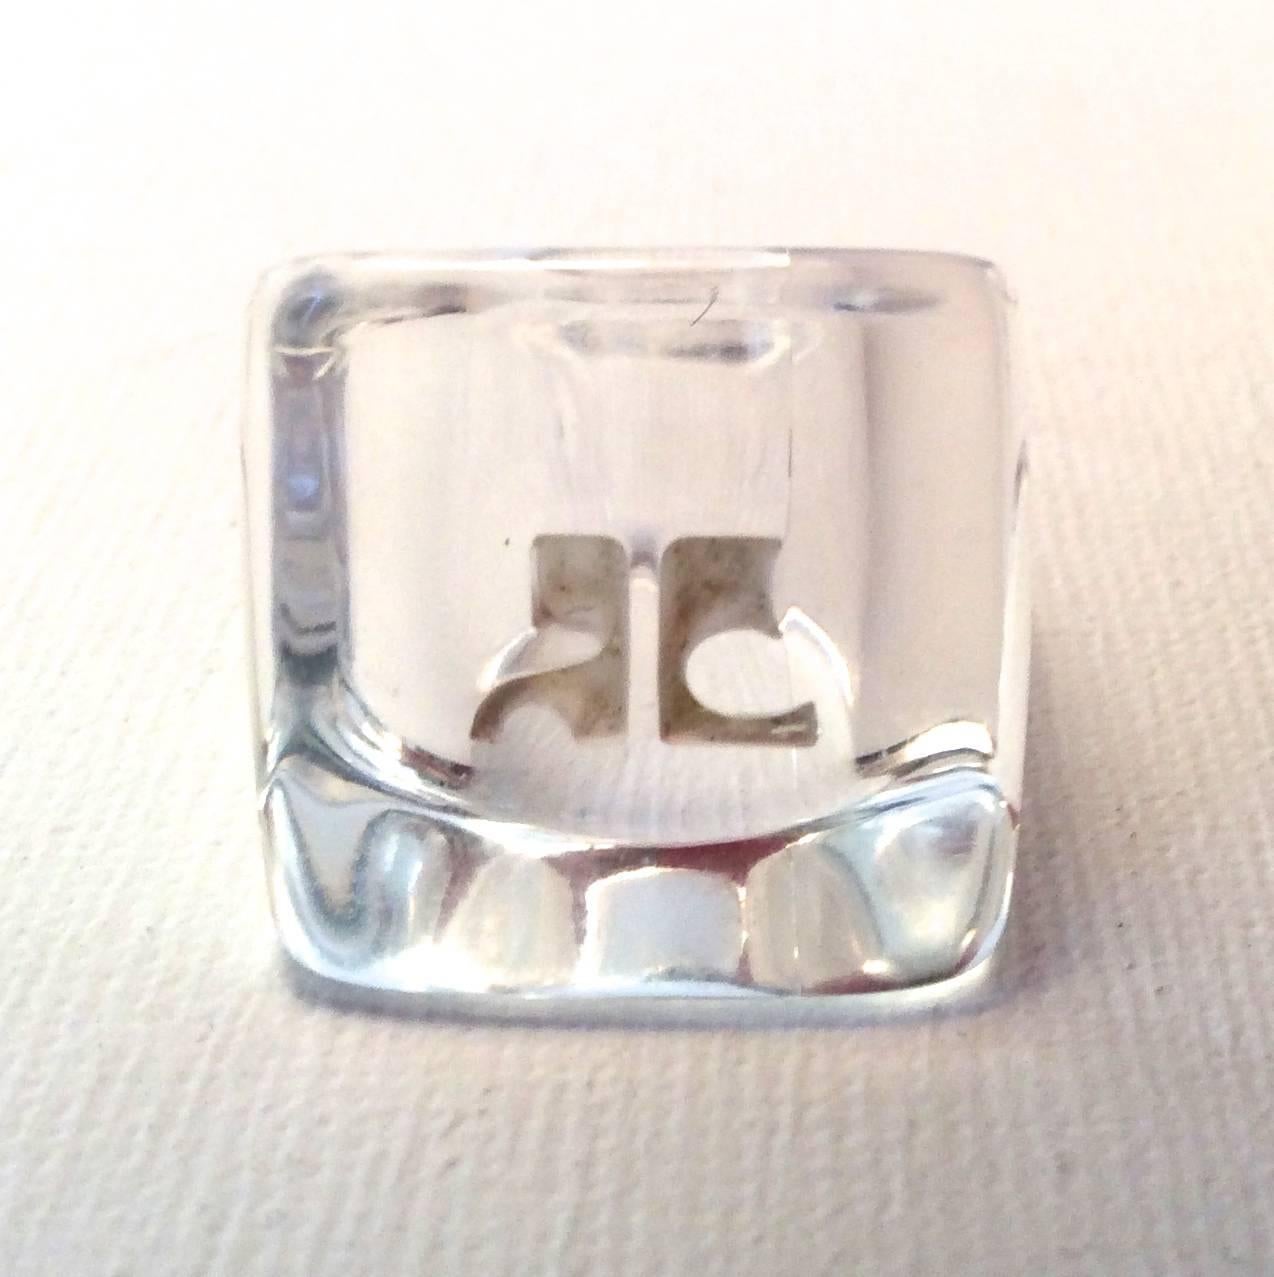 Presented here is fantastic Courreges lucite ring. The ring is lucite and is engraven with the iconic Coureges logo. The ring forms a square shape and is 3/4 of an inch on each side of the ring face. Ring is approximately a size 7 to a 7.5 US. Ring